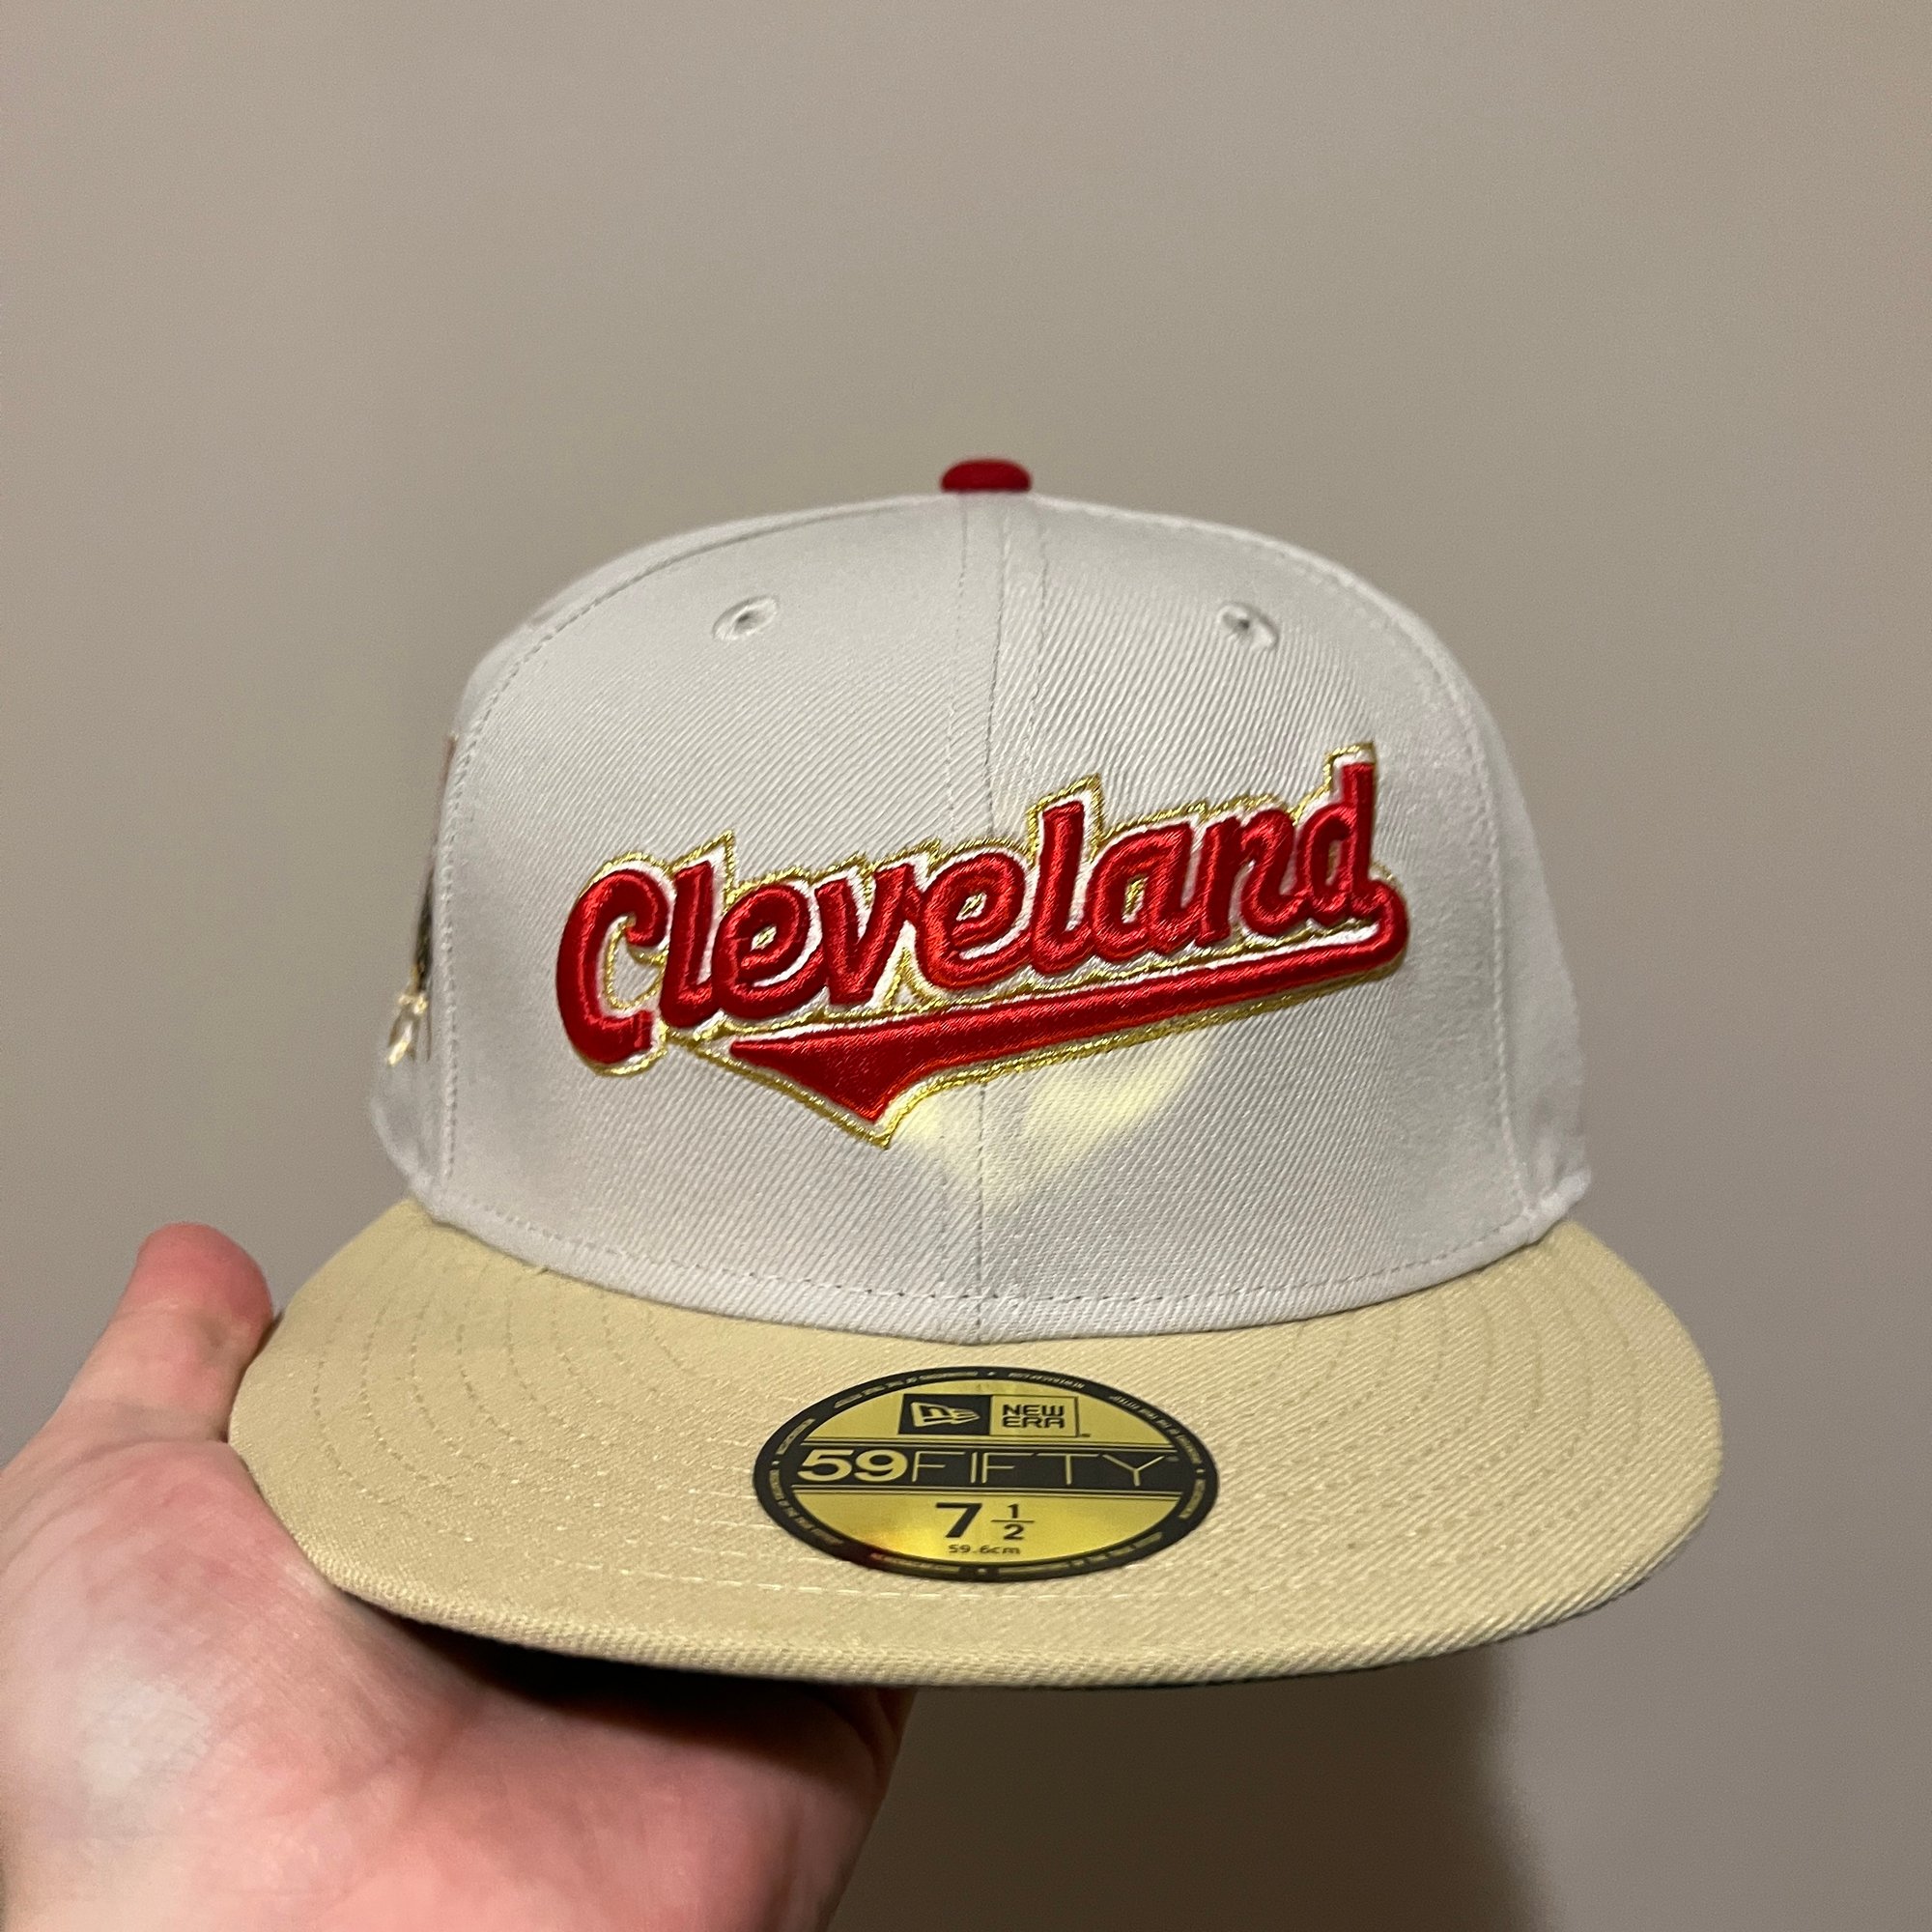 New Era Cleveland Indians Vegas Gold Two Tone Edition 59Fifty Fitted Hat, EXCLUSIVE HATS, CAPS